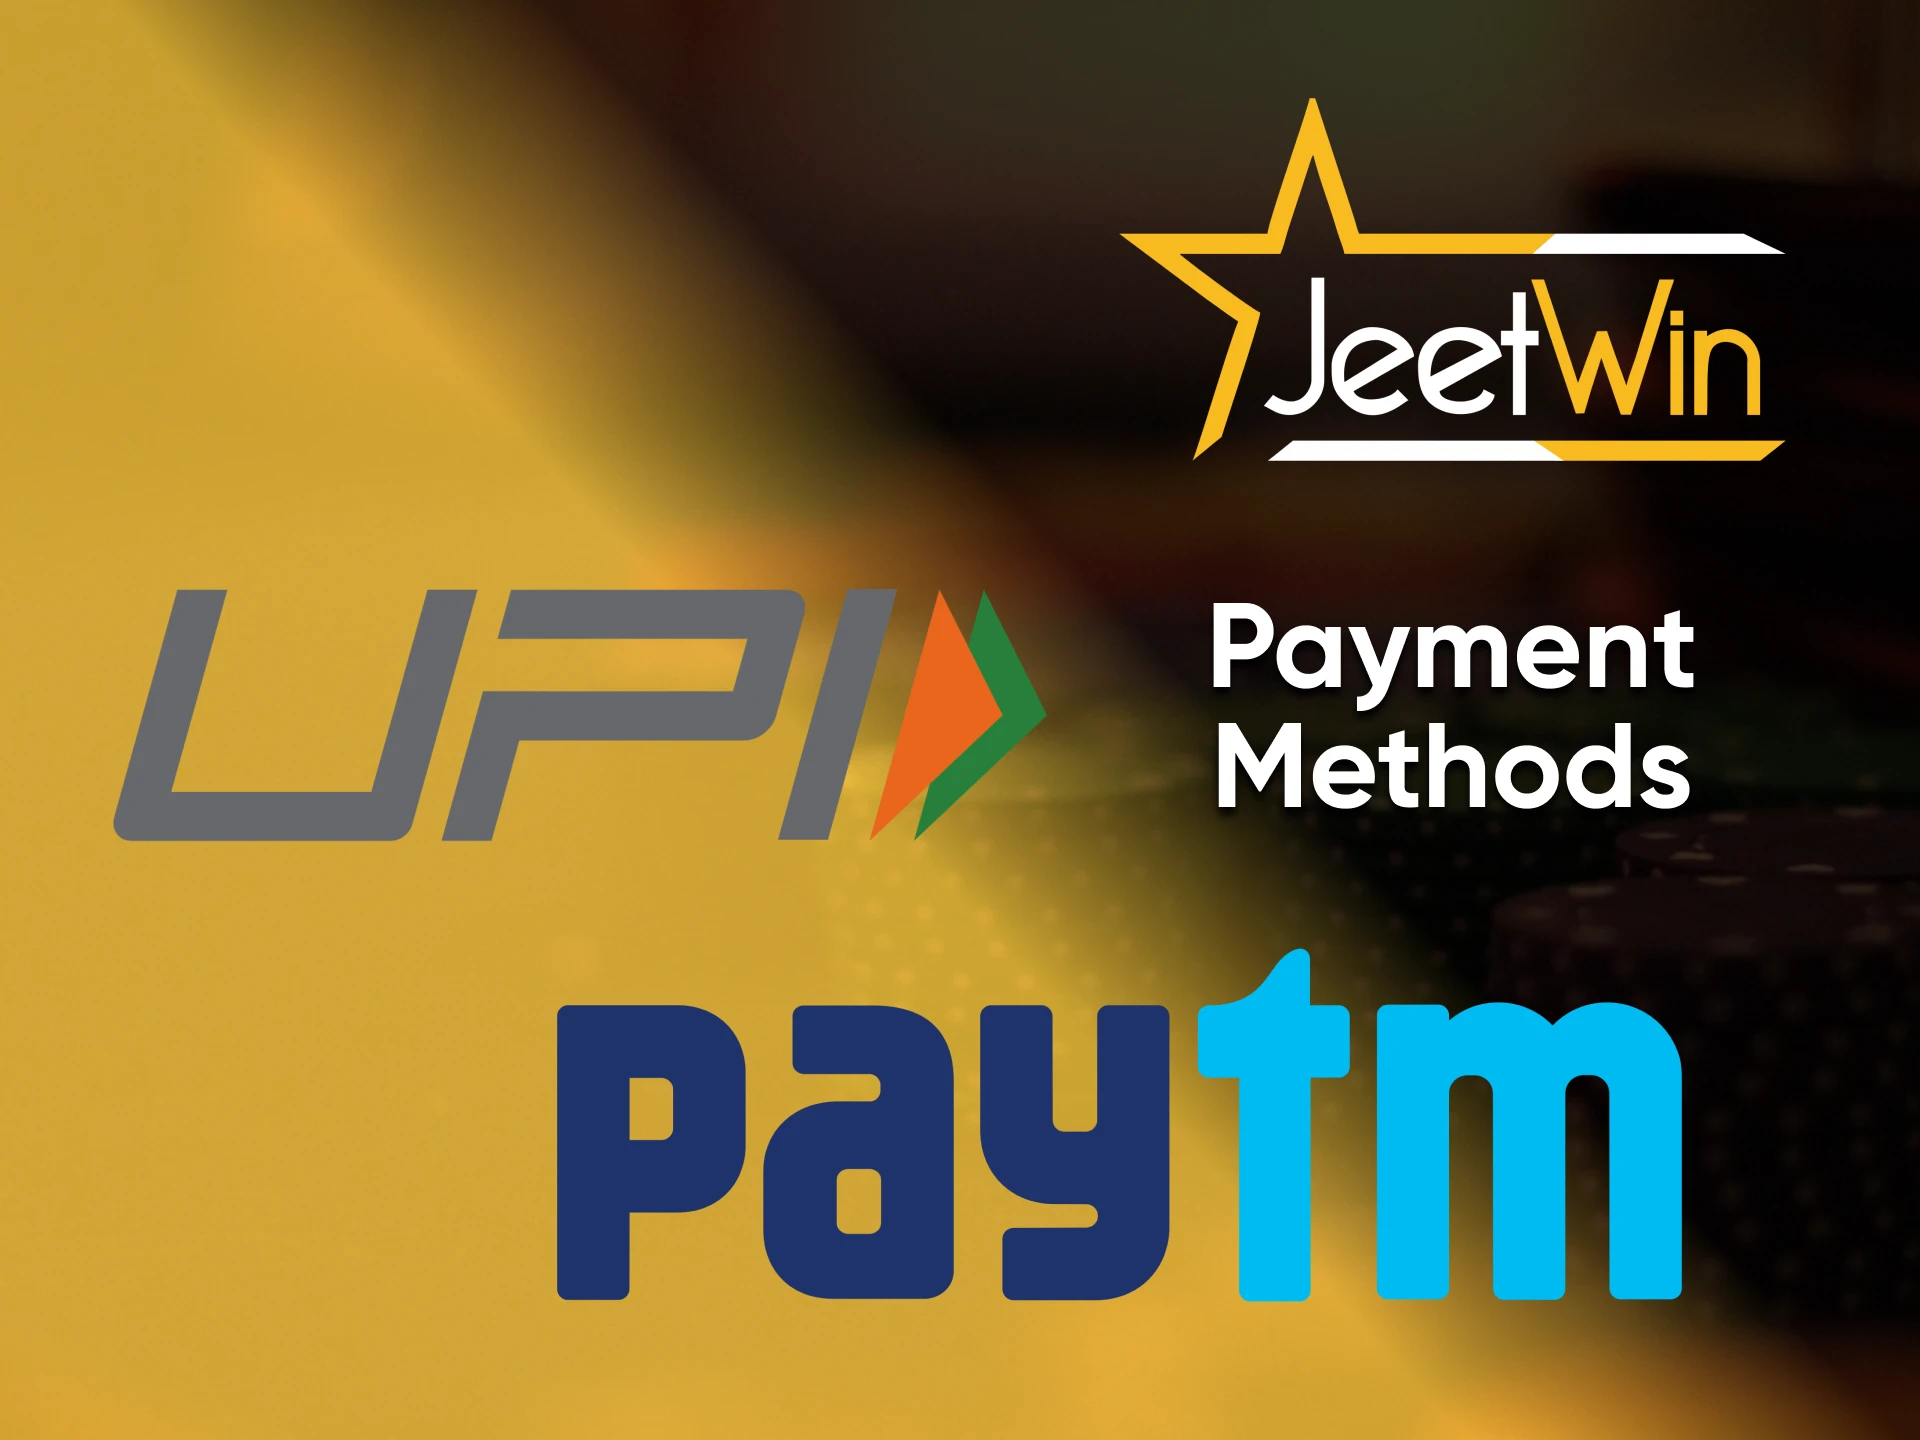 You can replenish your account in a way convenient for you from Jeetwin.